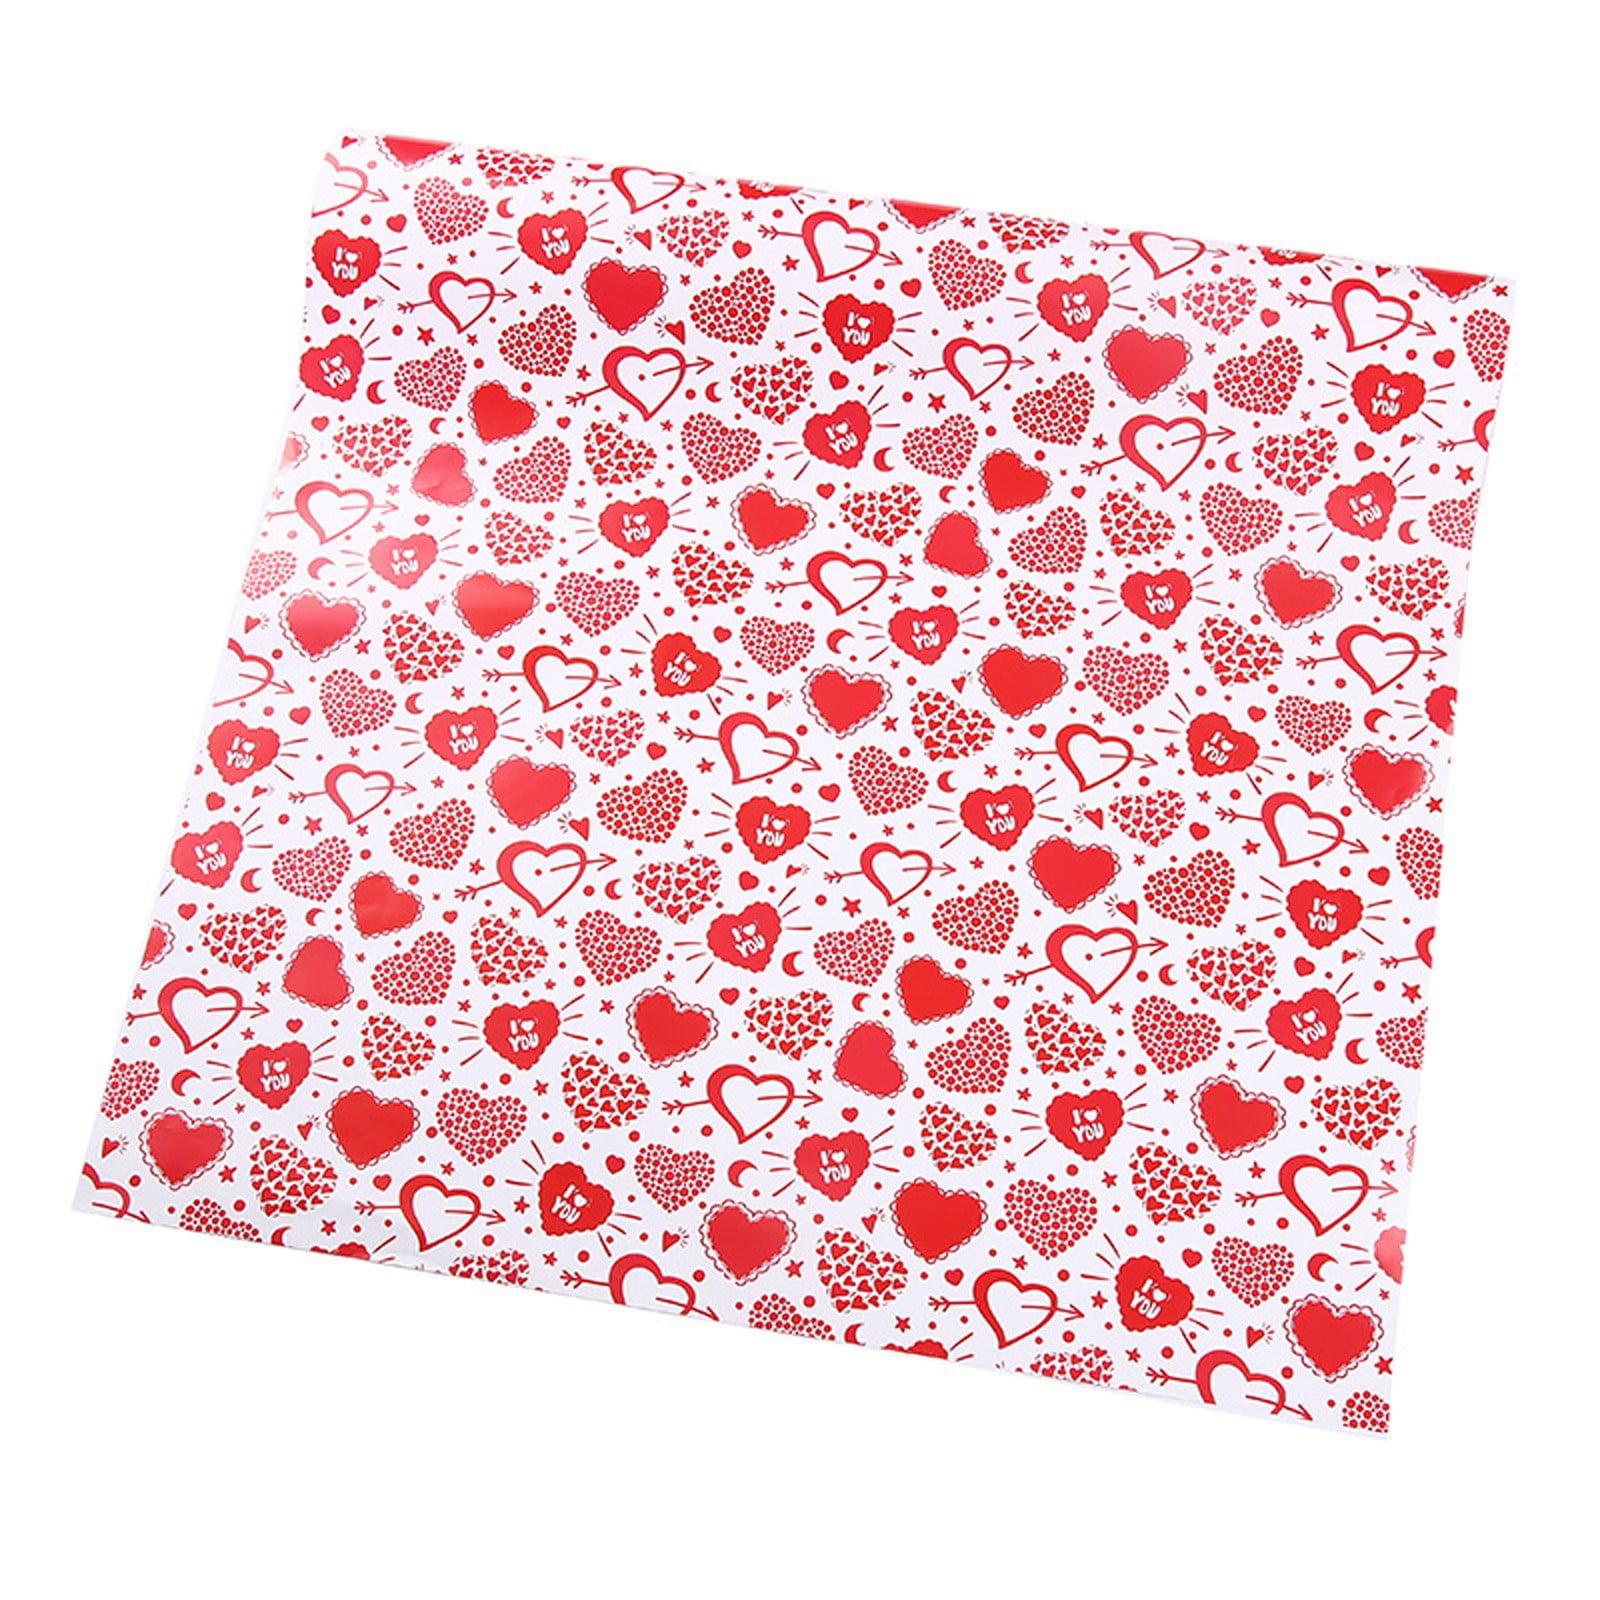 Yubnlvae home decor Valentine's Day Tissue Paper Gift Wrapping